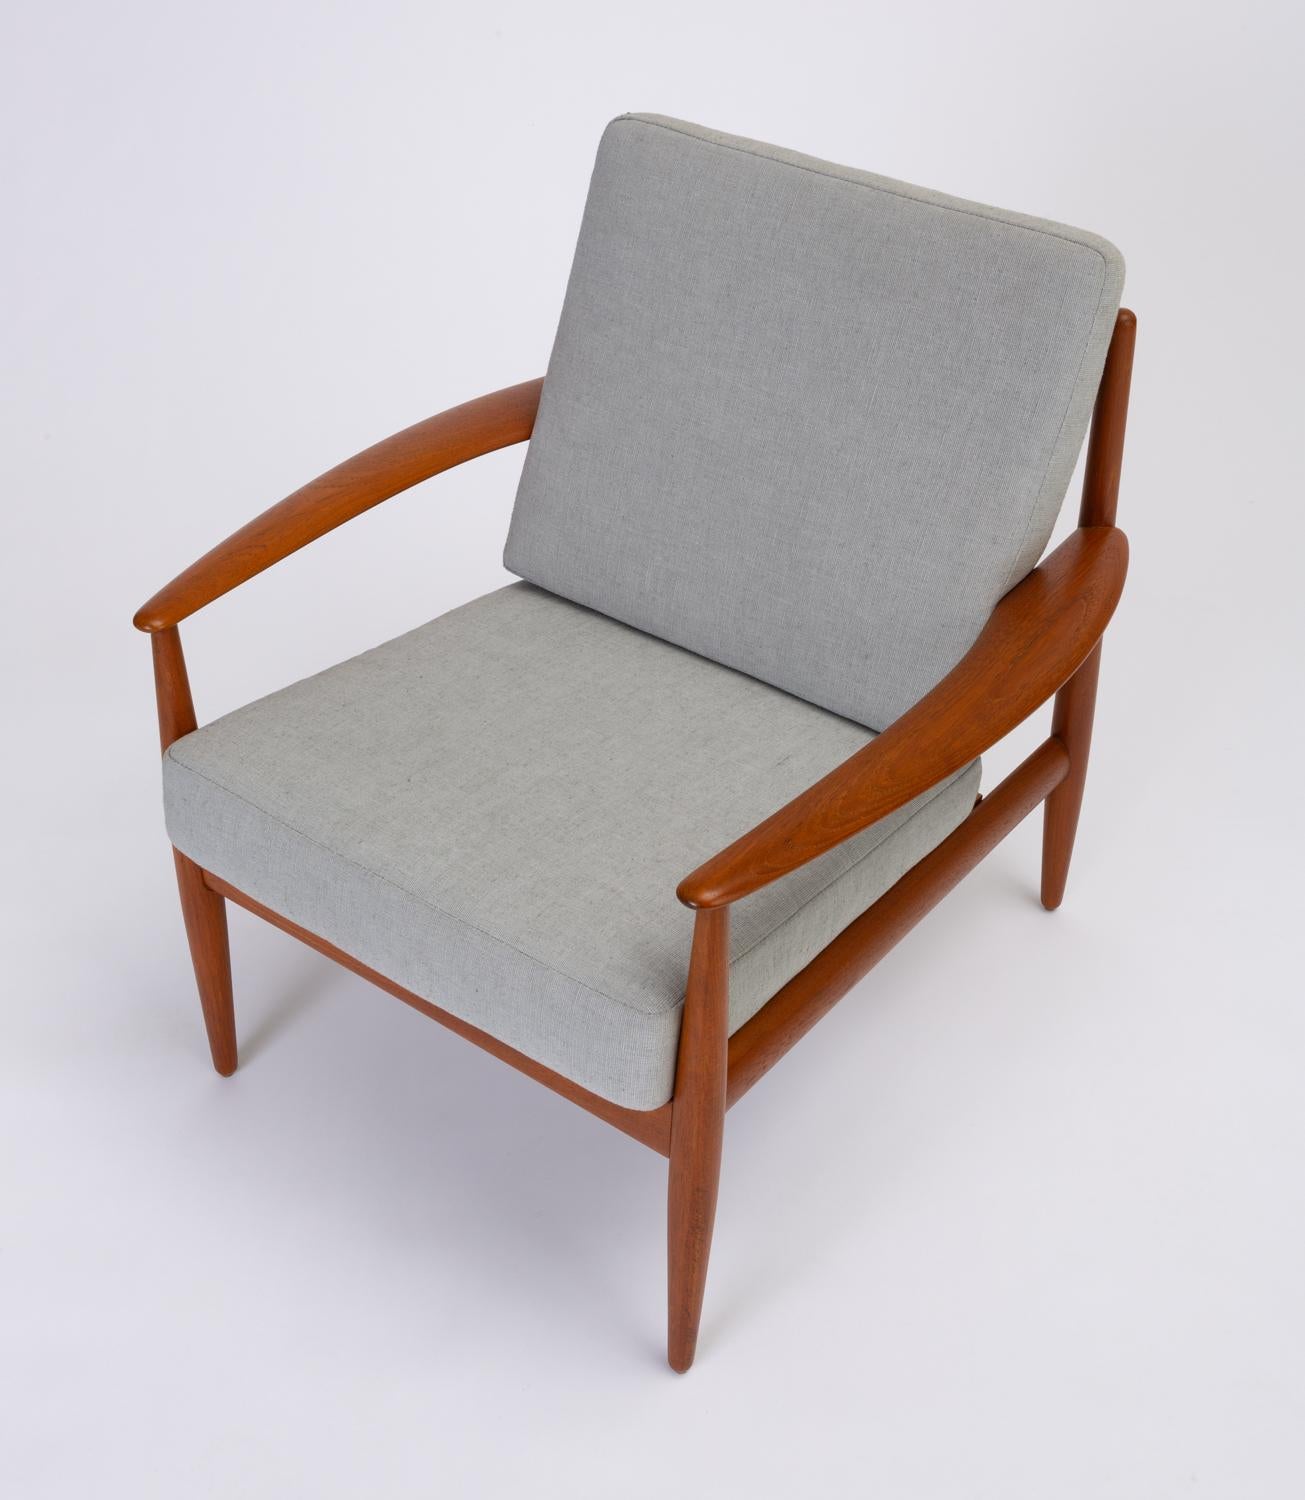 Mid-20th Century Pair of Teak Lounge Chairs by Grete Jalk for France & Son